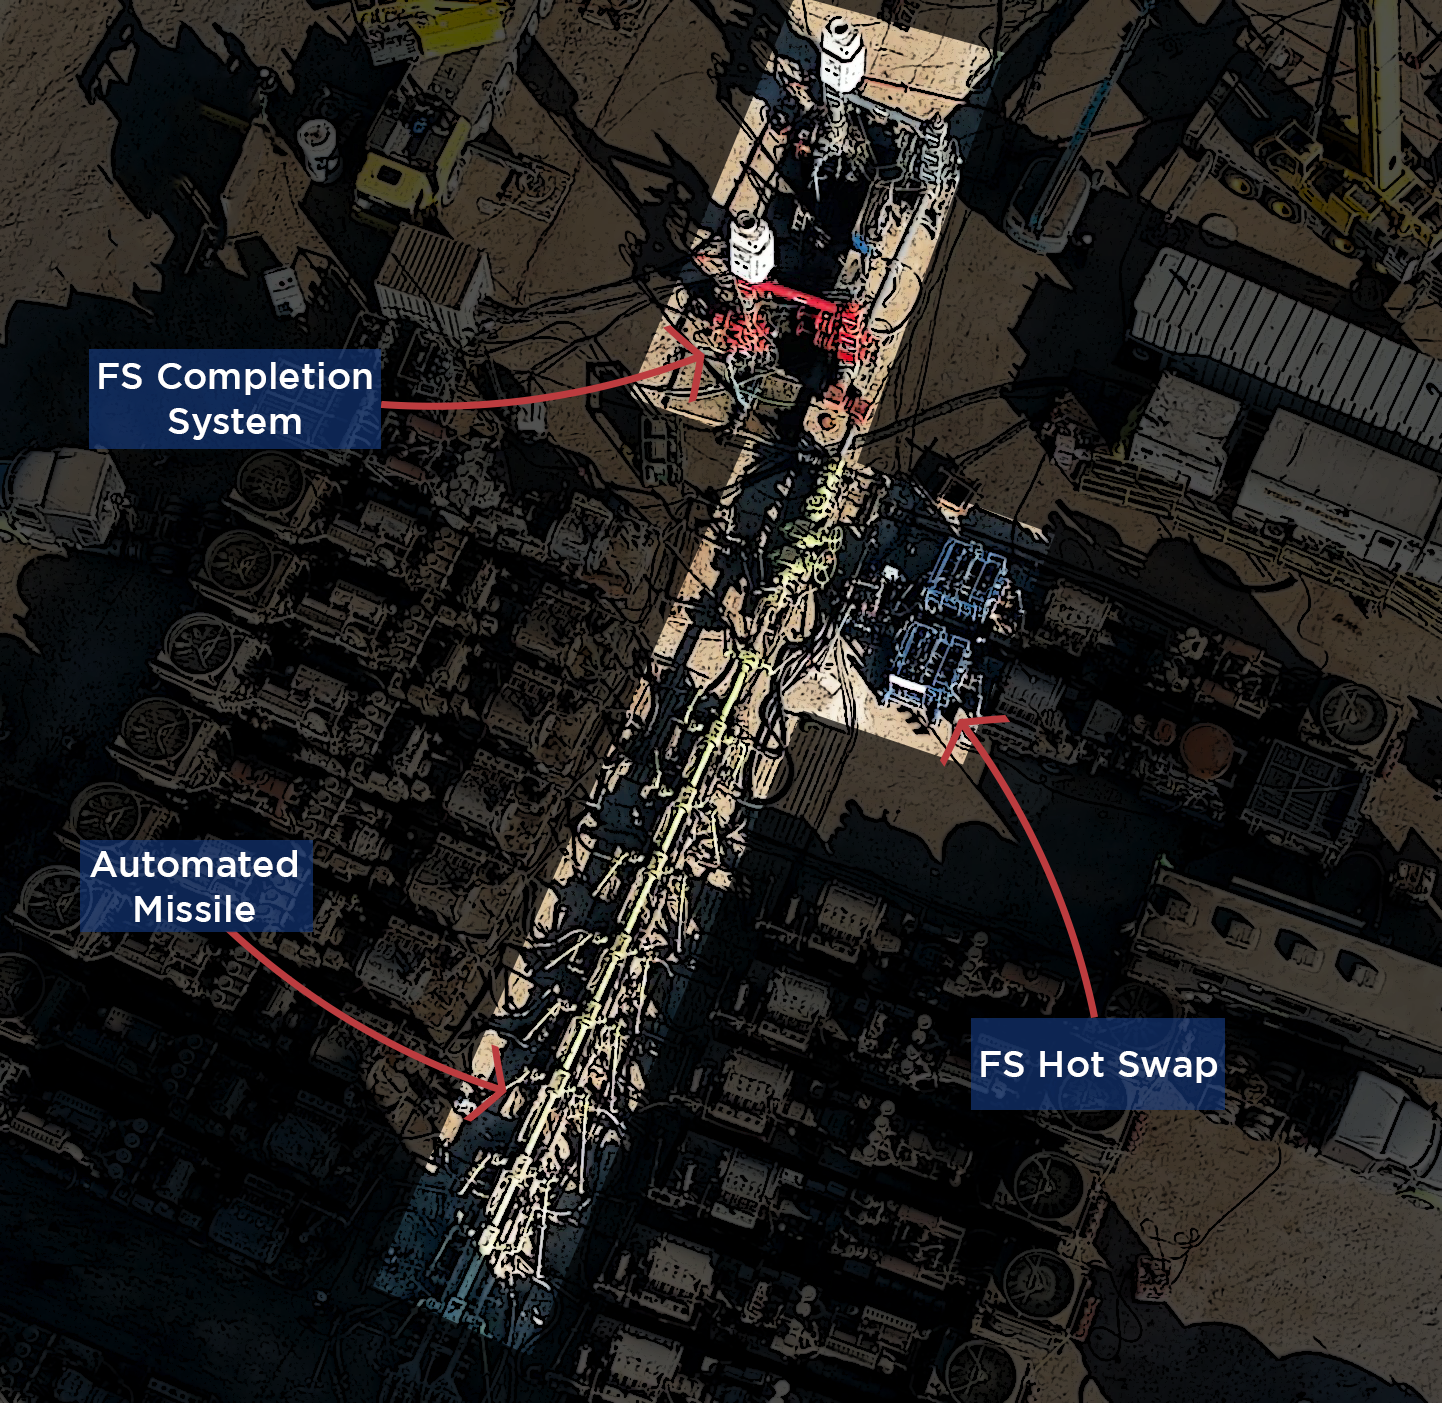 Overhead view of Freedom Series with FS Hot Swap and Automated Missile highlighted